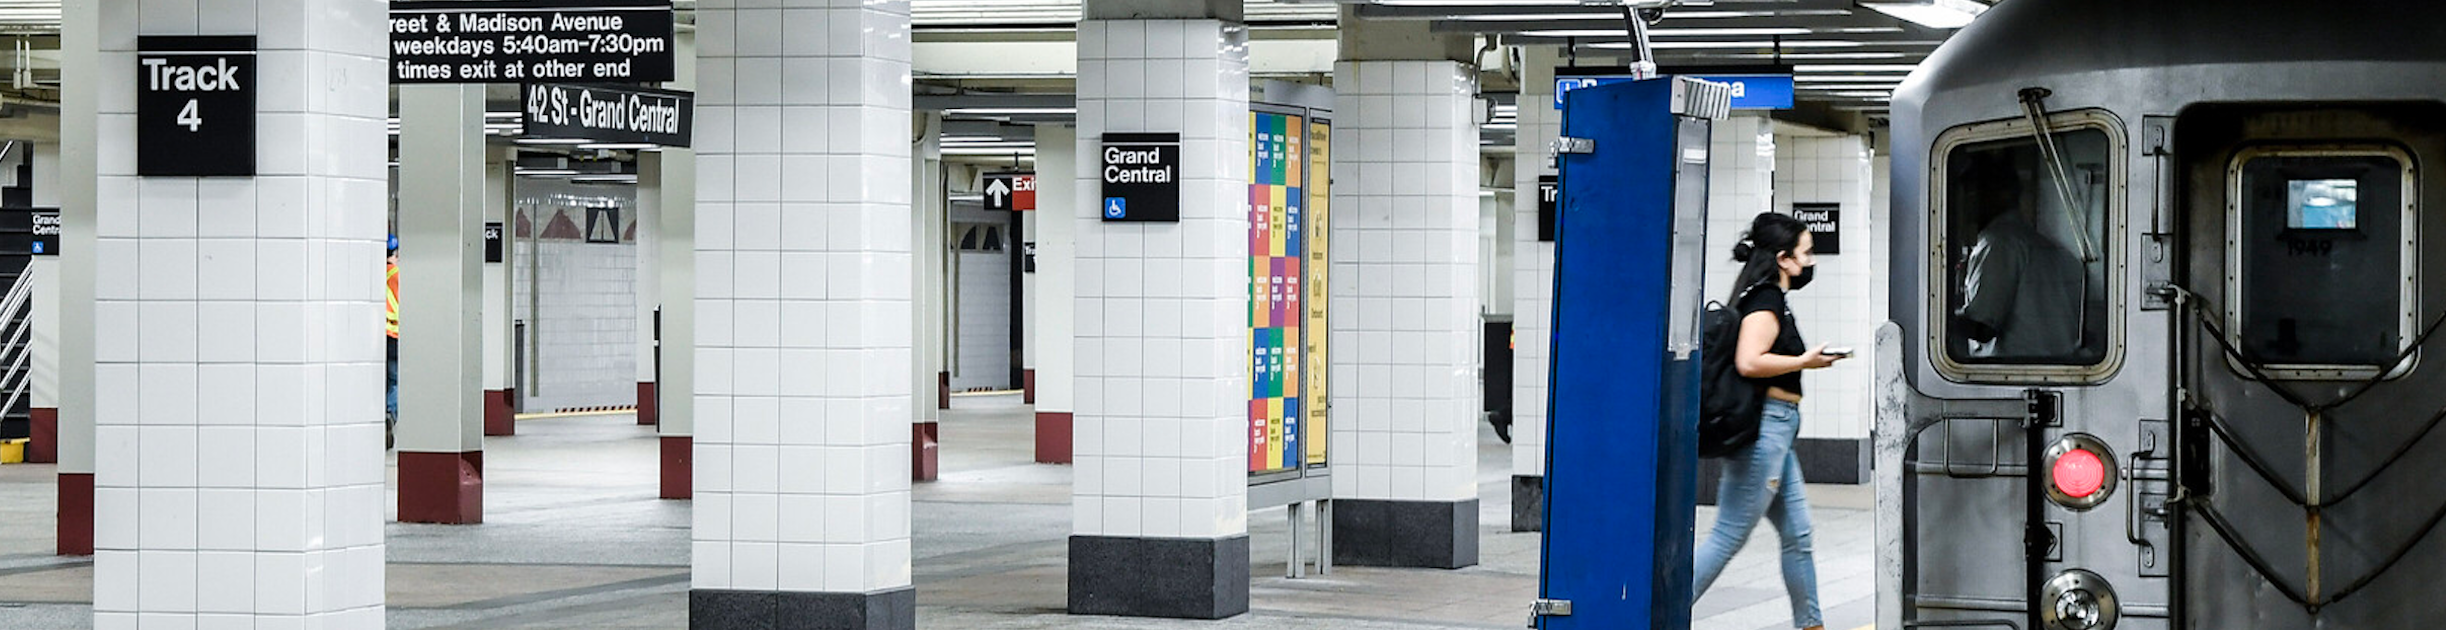 A subway platform with a woman boarding a train.